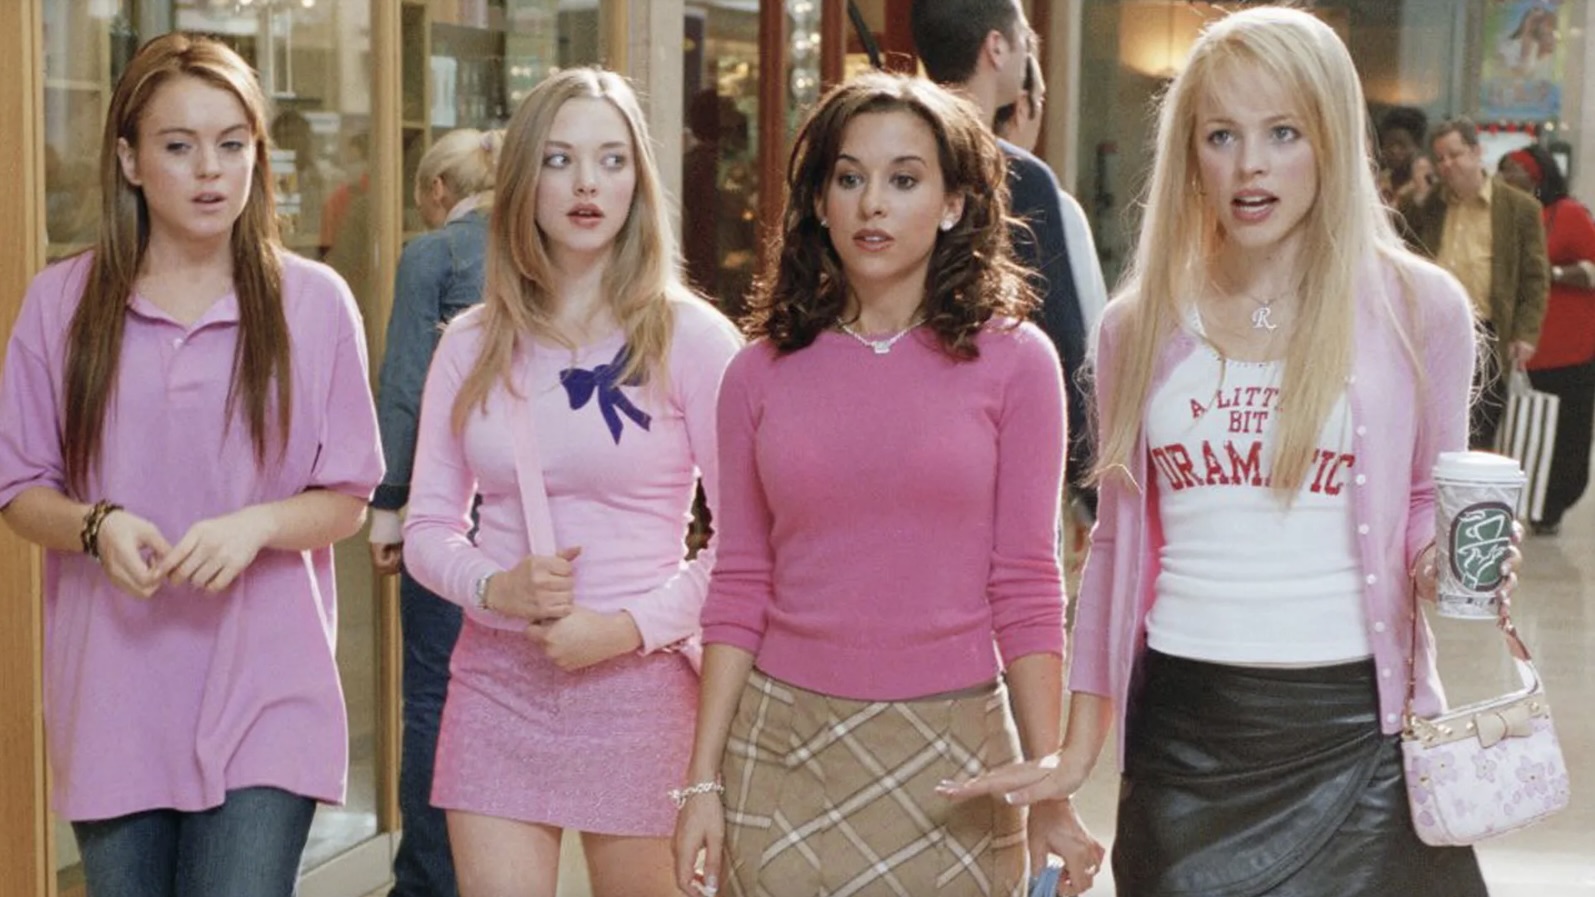 The Original Plastics May Return for the 'Mean Girls' Musical